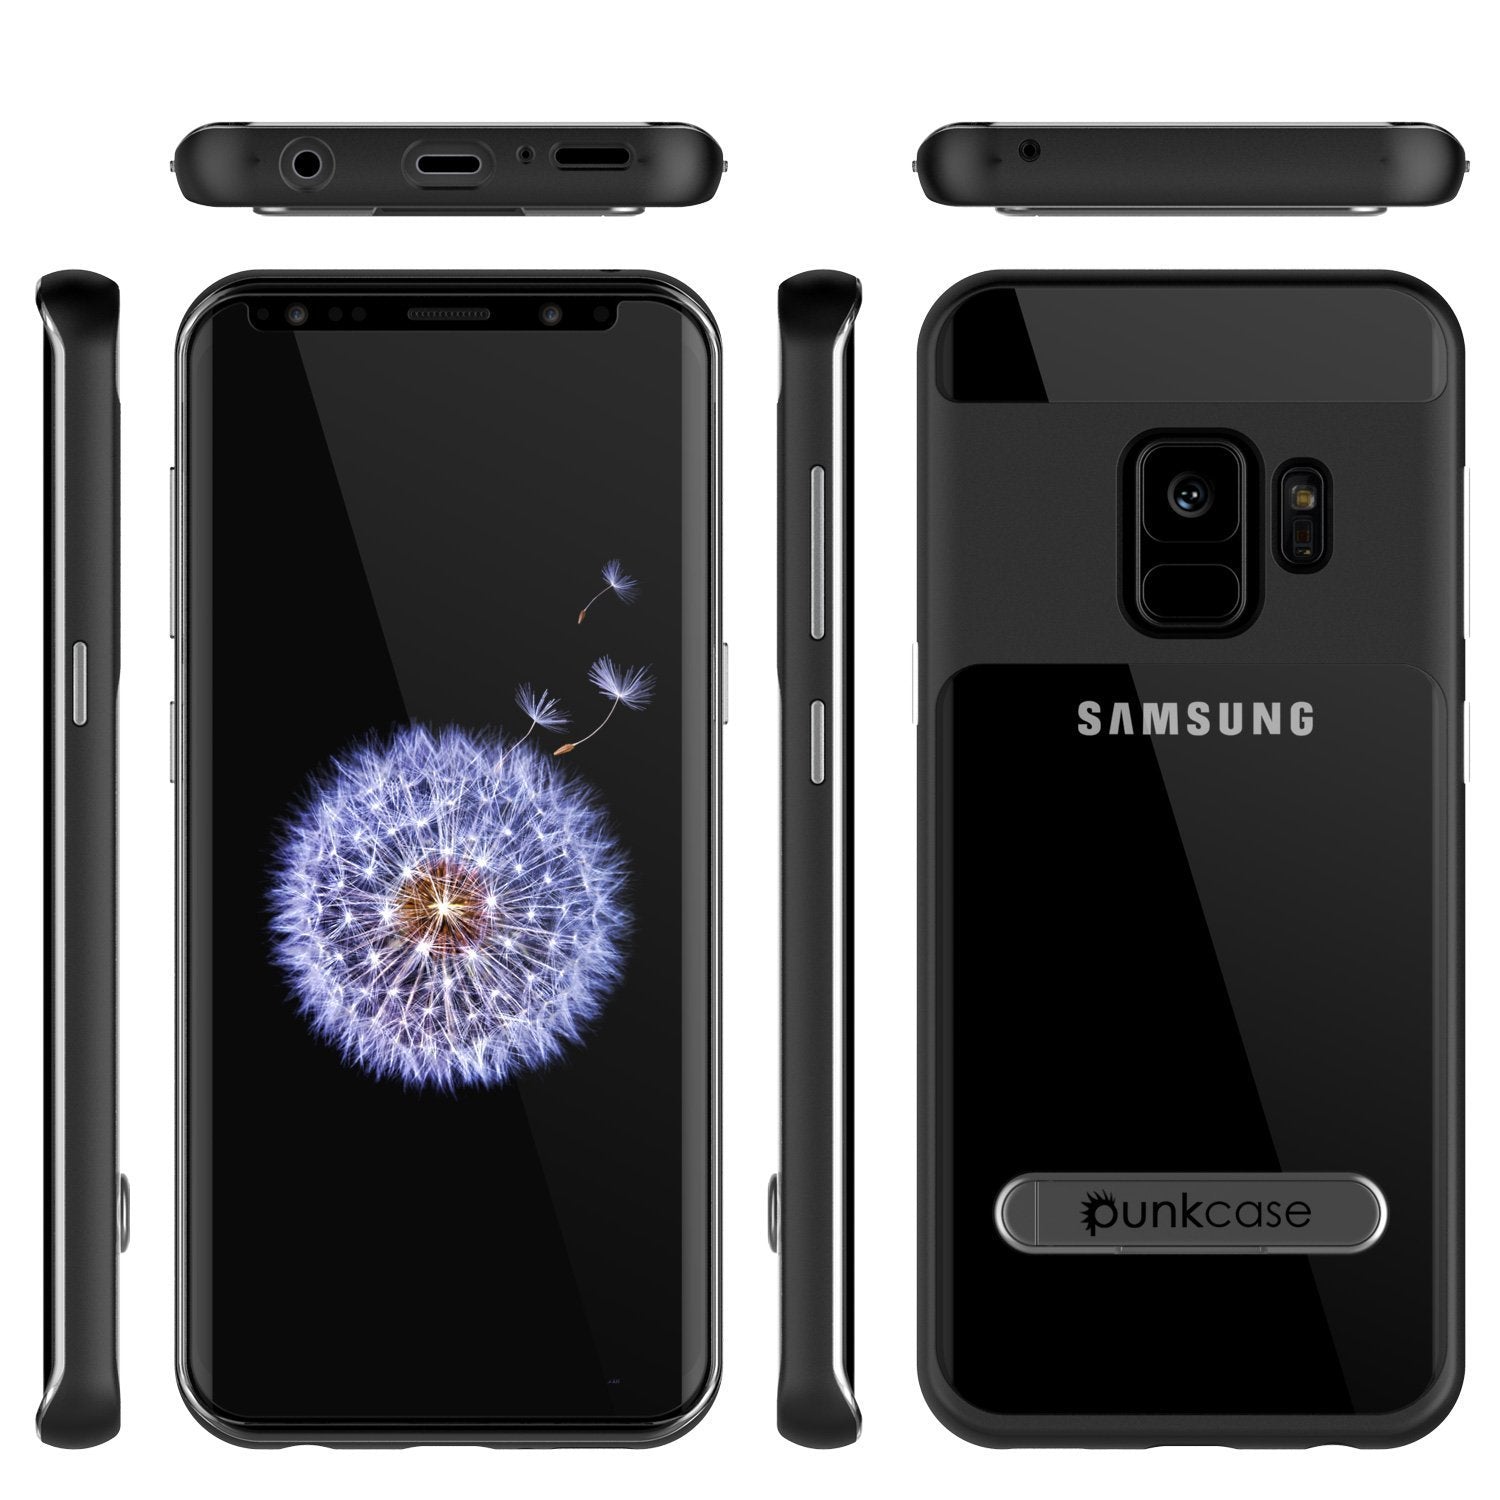 Galaxy S9 Case, PUNKcase [LUCID 3.0 Series] [Slim Fit] [Clear Back] Armor Cover w/ Integrated Kickstand, Anti-Shock System & PUNKSHIELD Screen Protector for Samsung Galaxy S9 [Black] - PunkCase NZ